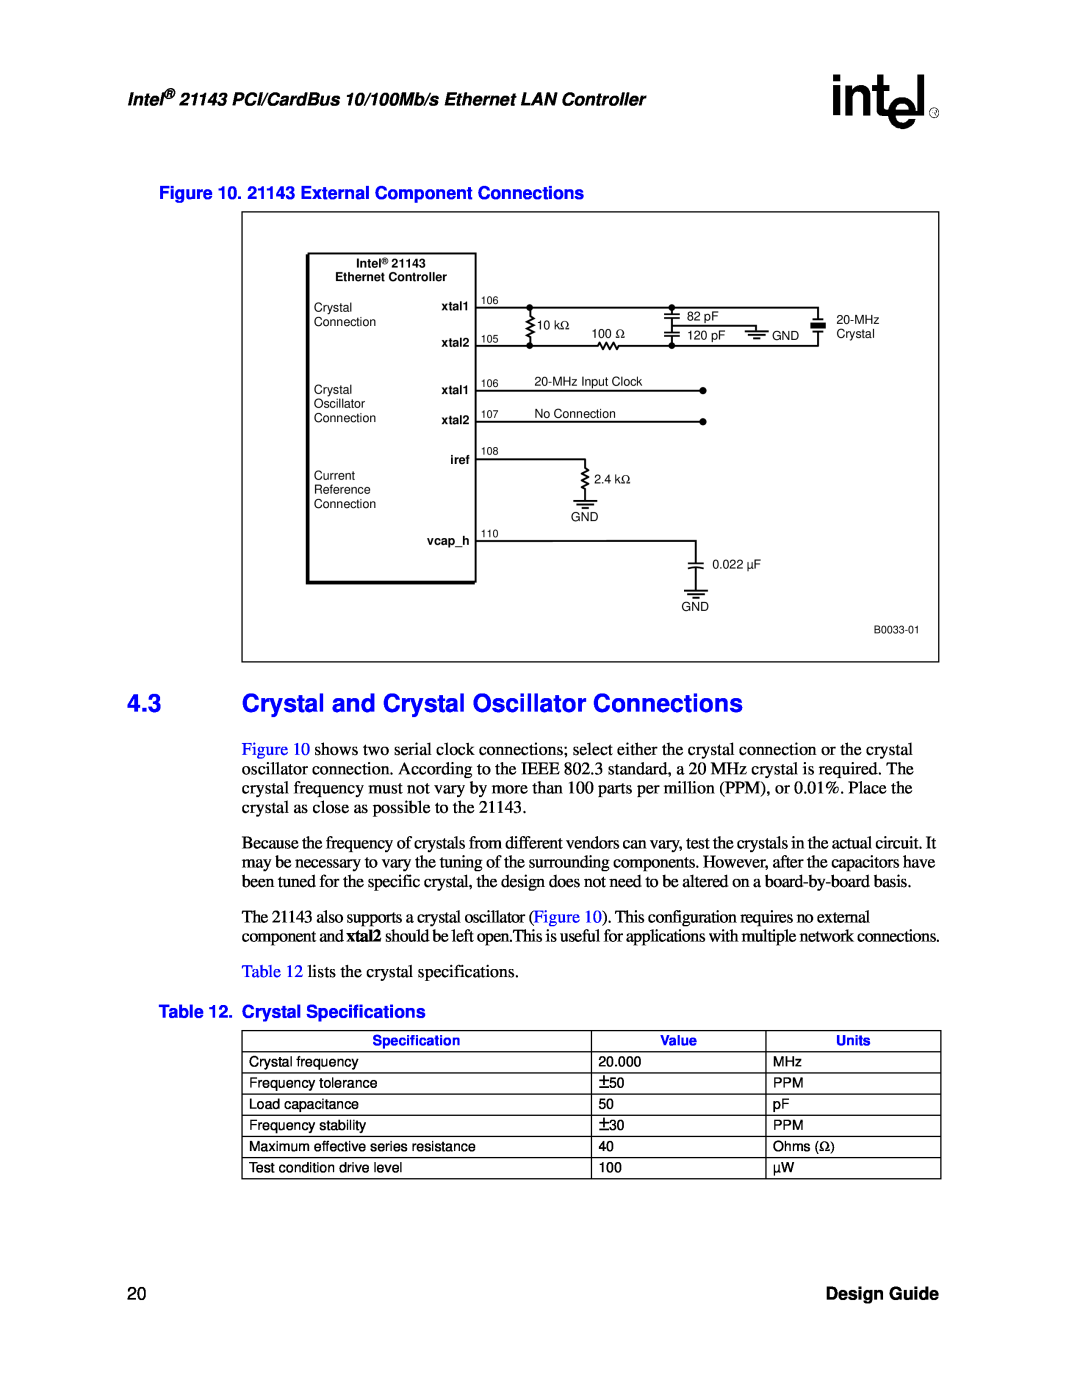 Intel manual Crystal and Crystal Oscillator Connections, 21143 External Component Connections, Crystal Specifications 